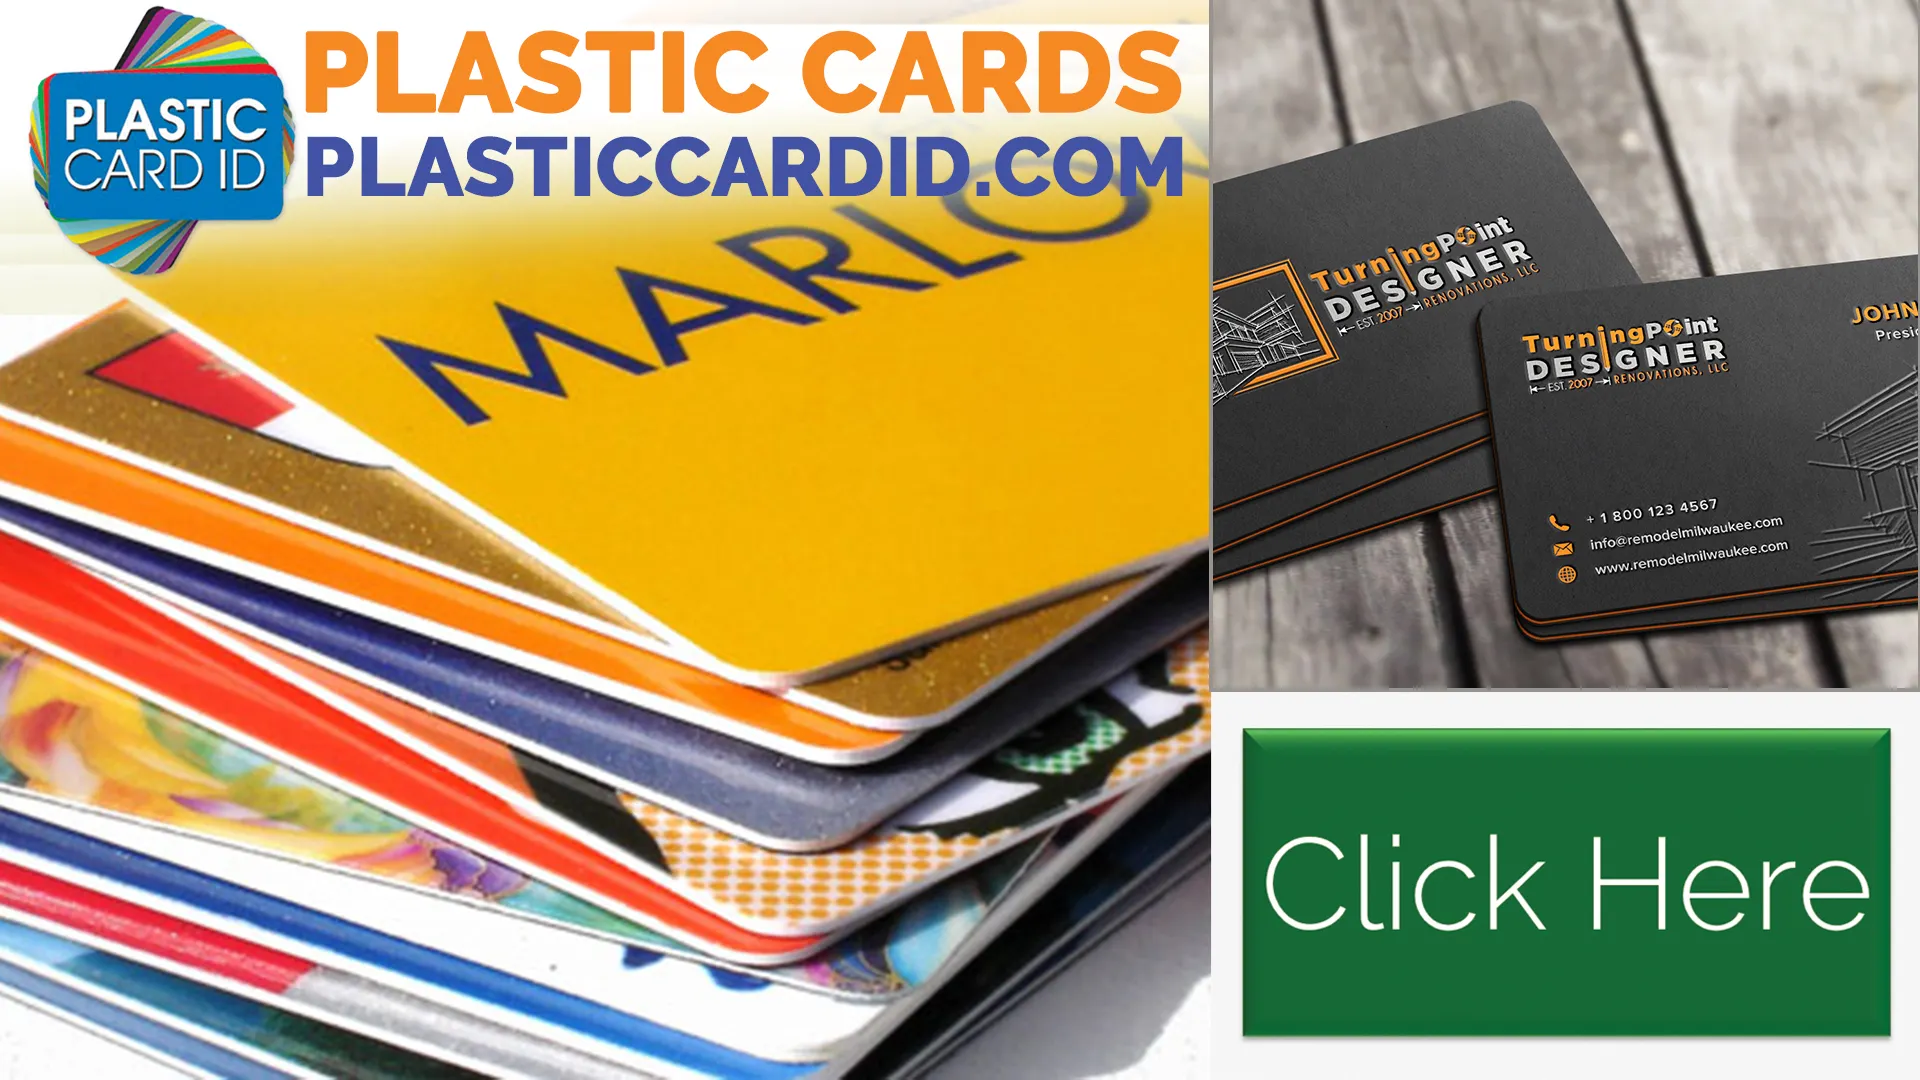 Experience the Power of Omnichannel Marketing with Plastic Cards